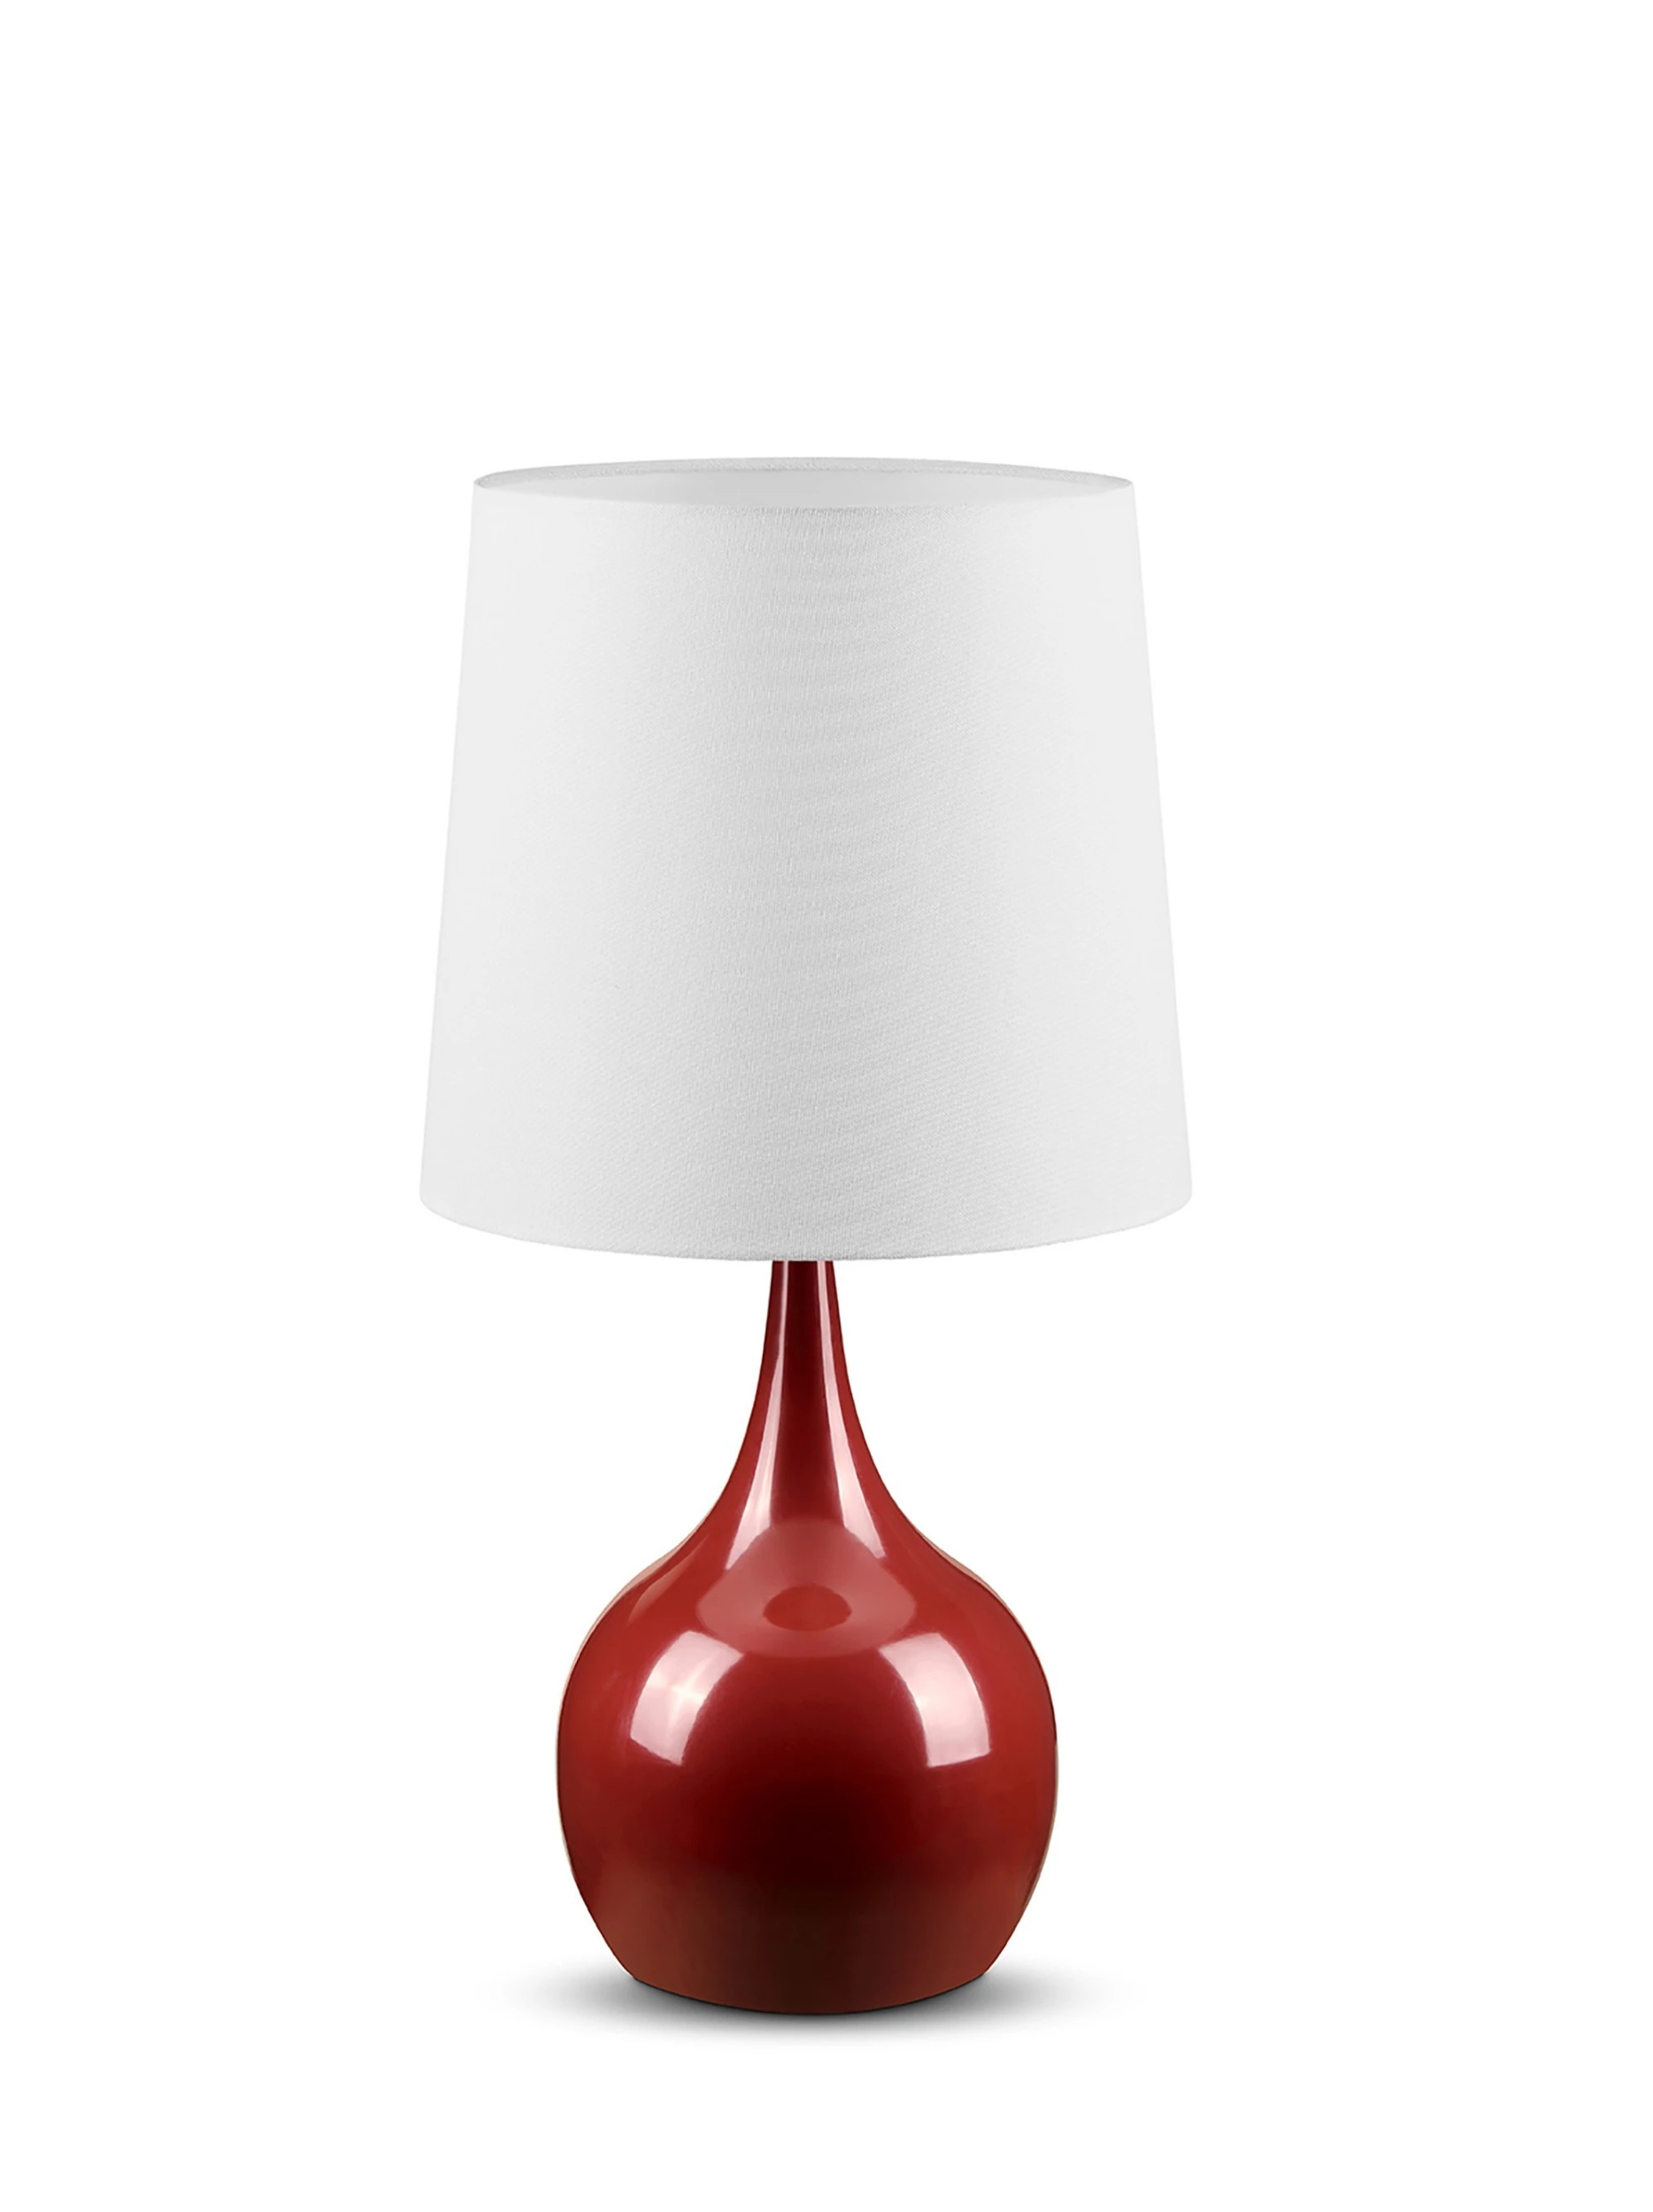 HomeRoots 468788 Minimalist Burgundy Table Lamp with Touch Switch - image 2 of 5